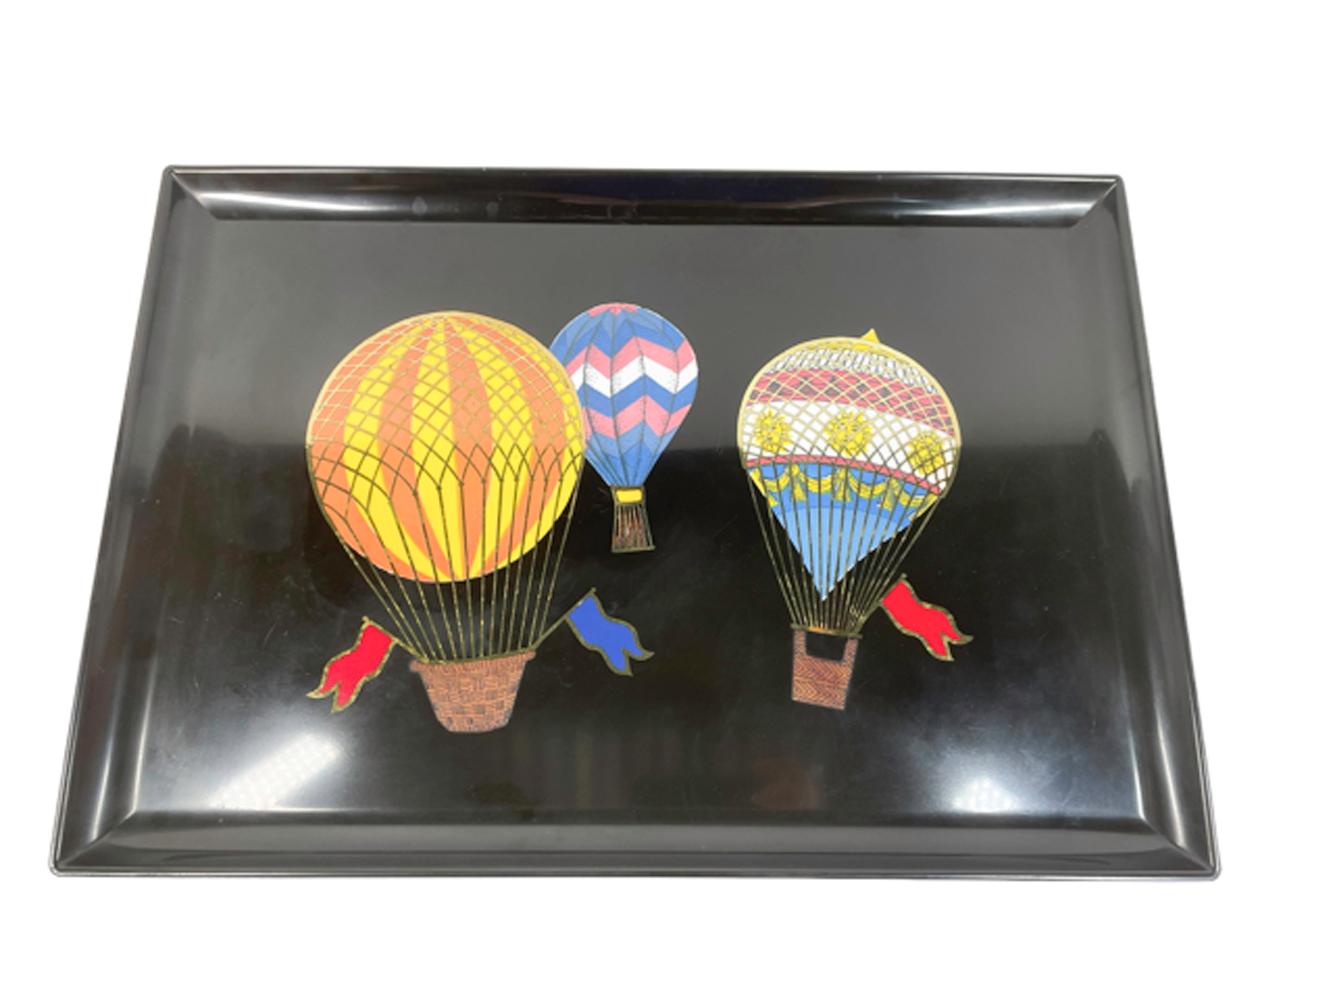 Mid-Century Modern serving tray made of black phenolic resin and inlaid with bright colored resins and brass hot air balloons. Phenolic resin was used for its resistance to damage from alcohol, hot water and cigarettes. 